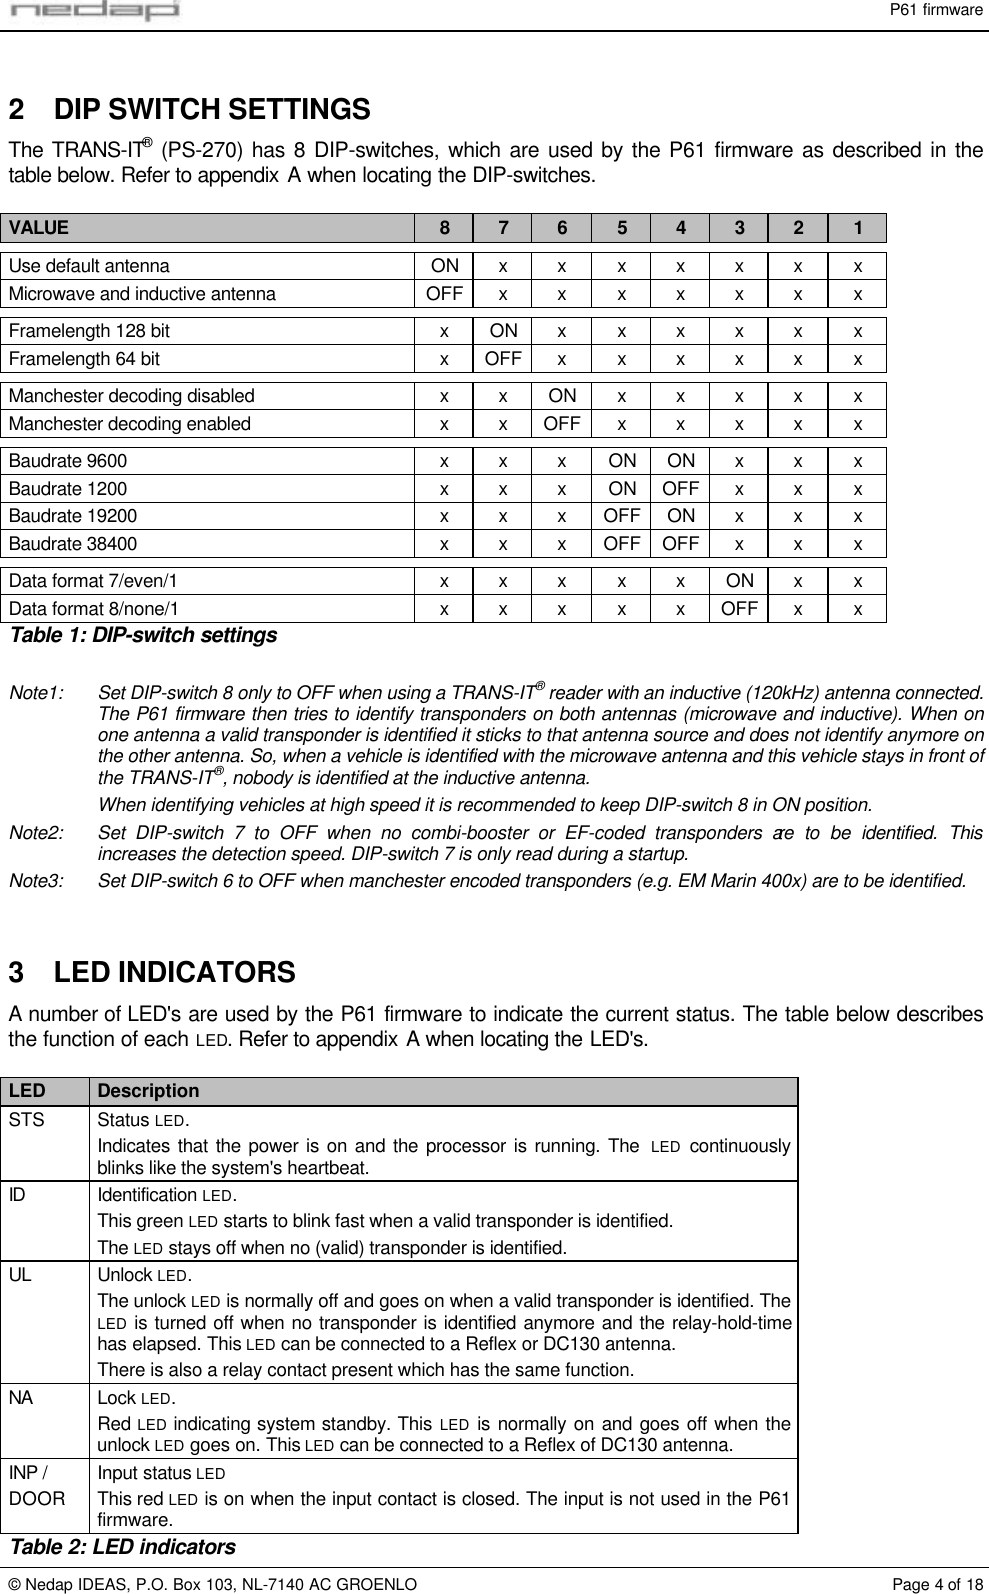 P61 firmware© Nedap IDEAS, P.O. Box 103, NL-7140 AC GROENLO Page 4 of 182 DIP SWITCH SETTINGSThe TRANS-IT® (PS-270) has 8 DIP-switches, which are used by the P61 firmware as described in thetable below. Refer to appendix A when locating the DIP-switches.VALUE 87654321Use default antenna ON xxxxxxxMicrowave and inductive antenna OFF xxxxxxxFramelength 128 bit xON x x x x x xFramelength 64 bit xOFF x x x x x xManchester decoding disabled x x ON xxxxxManchester decoding enabled x x OFF xxxxxBaudrate 9600 xxxON ON x x xBaudrate 1200 xxxON OFF x x xBaudrate 19200 xxxOFF ON x x xBaudrate 38400 xxxOFF OFF x x xData format 7/even/1 xxxxxON x xData format 8/none/1 xxxxxOFF x xTable 1: DIP-switch settingsNote1: Set DIP-switch 8 only to OFF when using a TRANS-IT® reader with an inductive (120kHz) antenna connected.The P61 firmware then tries to identify transponders on both antennas (microwave and inductive). When onone antenna a valid transponder is identified it sticks to that antenna source and does not identify anymore onthe other antenna. So, when a vehicle is identified with the microwave antenna and this vehicle stays in front ofthe TRANS-IT®, nobody is identified at the inductive antenna.When identifying vehicles at high speed it is recommended to keep DIP-switch 8 in ON position.Note2: Set DIP-switch 7 to OFF when no combi-booster or EF-coded transponders are to be identified. Thisincreases the detection speed. DIP-switch 7 is only read during a startup.Note3: Set DIP-switch 6 to OFF when manchester encoded transponders (e.g. EM Marin 400x) are to be identified.3 LED INDICATORSA number of LED&apos;s are used by the P61 firmware to indicate the current status. The table below describesthe function of each LED. Refer to appendix A when locating the LED&apos;s.LED DescriptionSTS Status LED.Indicates that the power is on and the processor is running. The  LED continuouslyblinks like the system&apos;s heartbeat.ID Identification LED.This green LED starts to blink fast when a valid transponder is identified.The LED stays off when no (valid) transponder is identified.UL Unlock LED.The unlock LED is normally off and goes on when a valid transponder is identified. TheLED is turned off when no transponder is identified anymore and the relay-hold-timehas elapsed. This LED can be connected to a Reflex or DC130 antenna.There is also a relay contact present which has the same function.NA Lock LED.Red LED indicating system standby. This LED is normally on and goes off when theunlock LED goes on. This LED can be connected to a Reflex of DC130 antenna.INP /DOORInput status LEDThis red LED is on when the input contact is closed. The input is not used in the P61firmware.Table 2: LED indicators